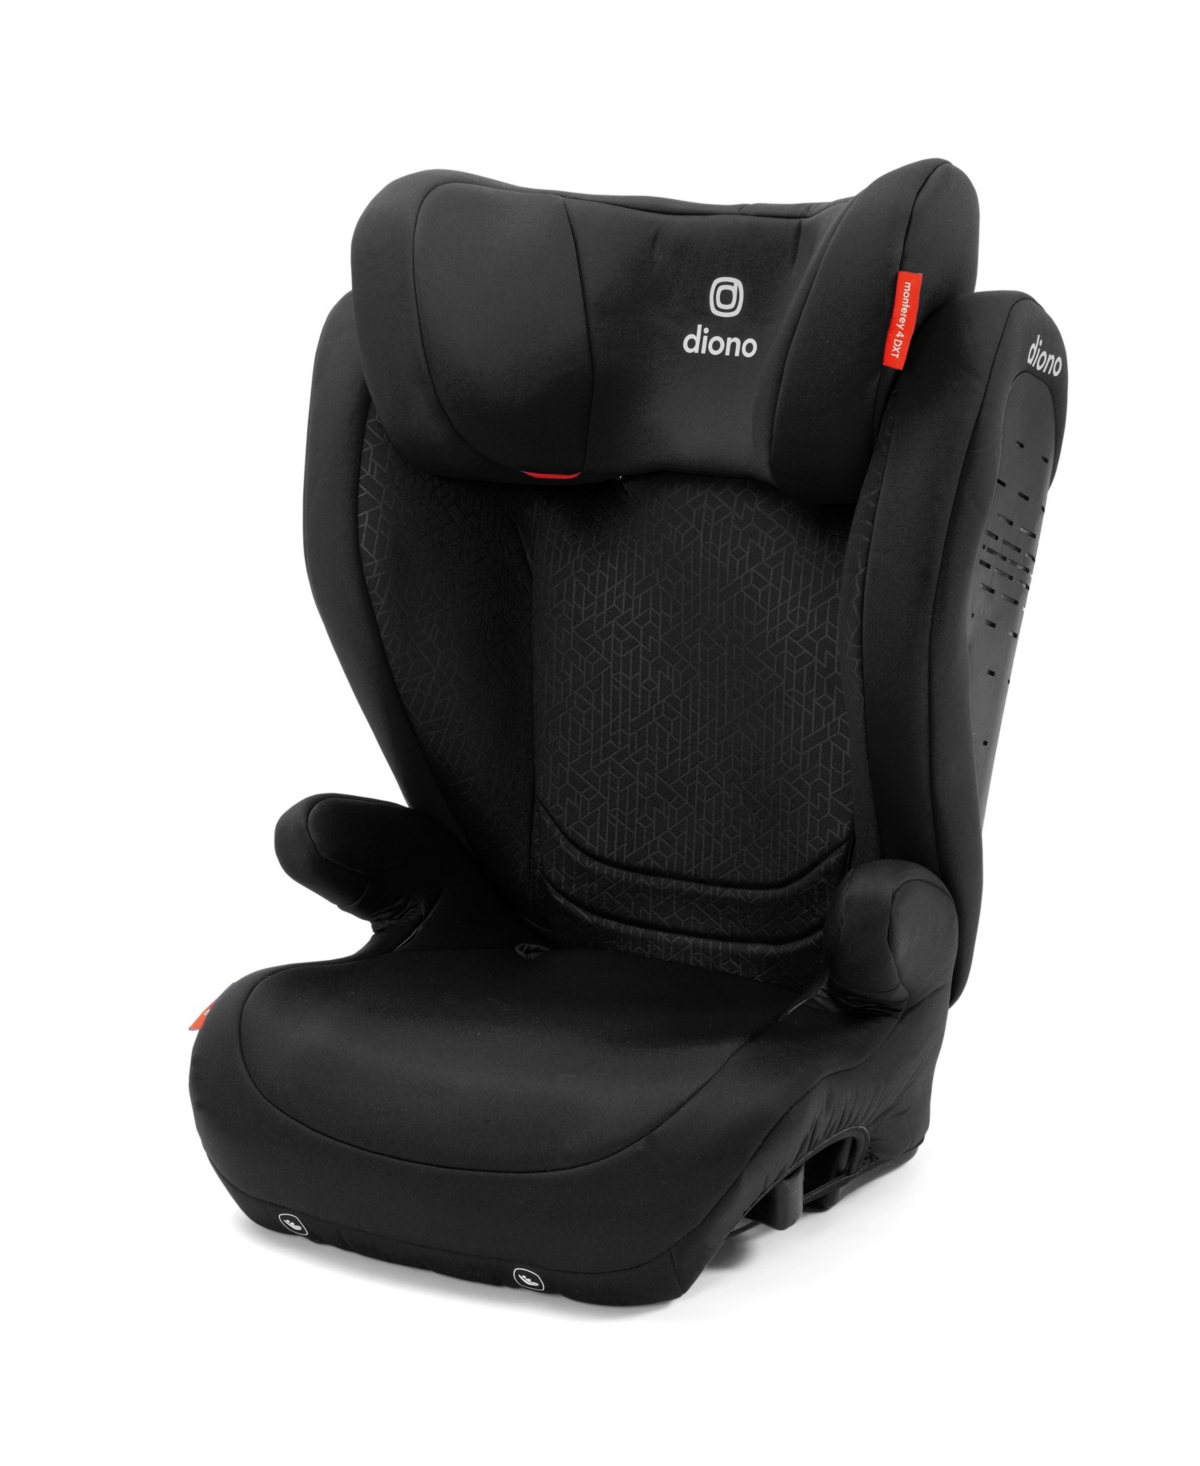 Diono Monterey 4dxt Latch 2-in-1 Booster Car Seat In Black